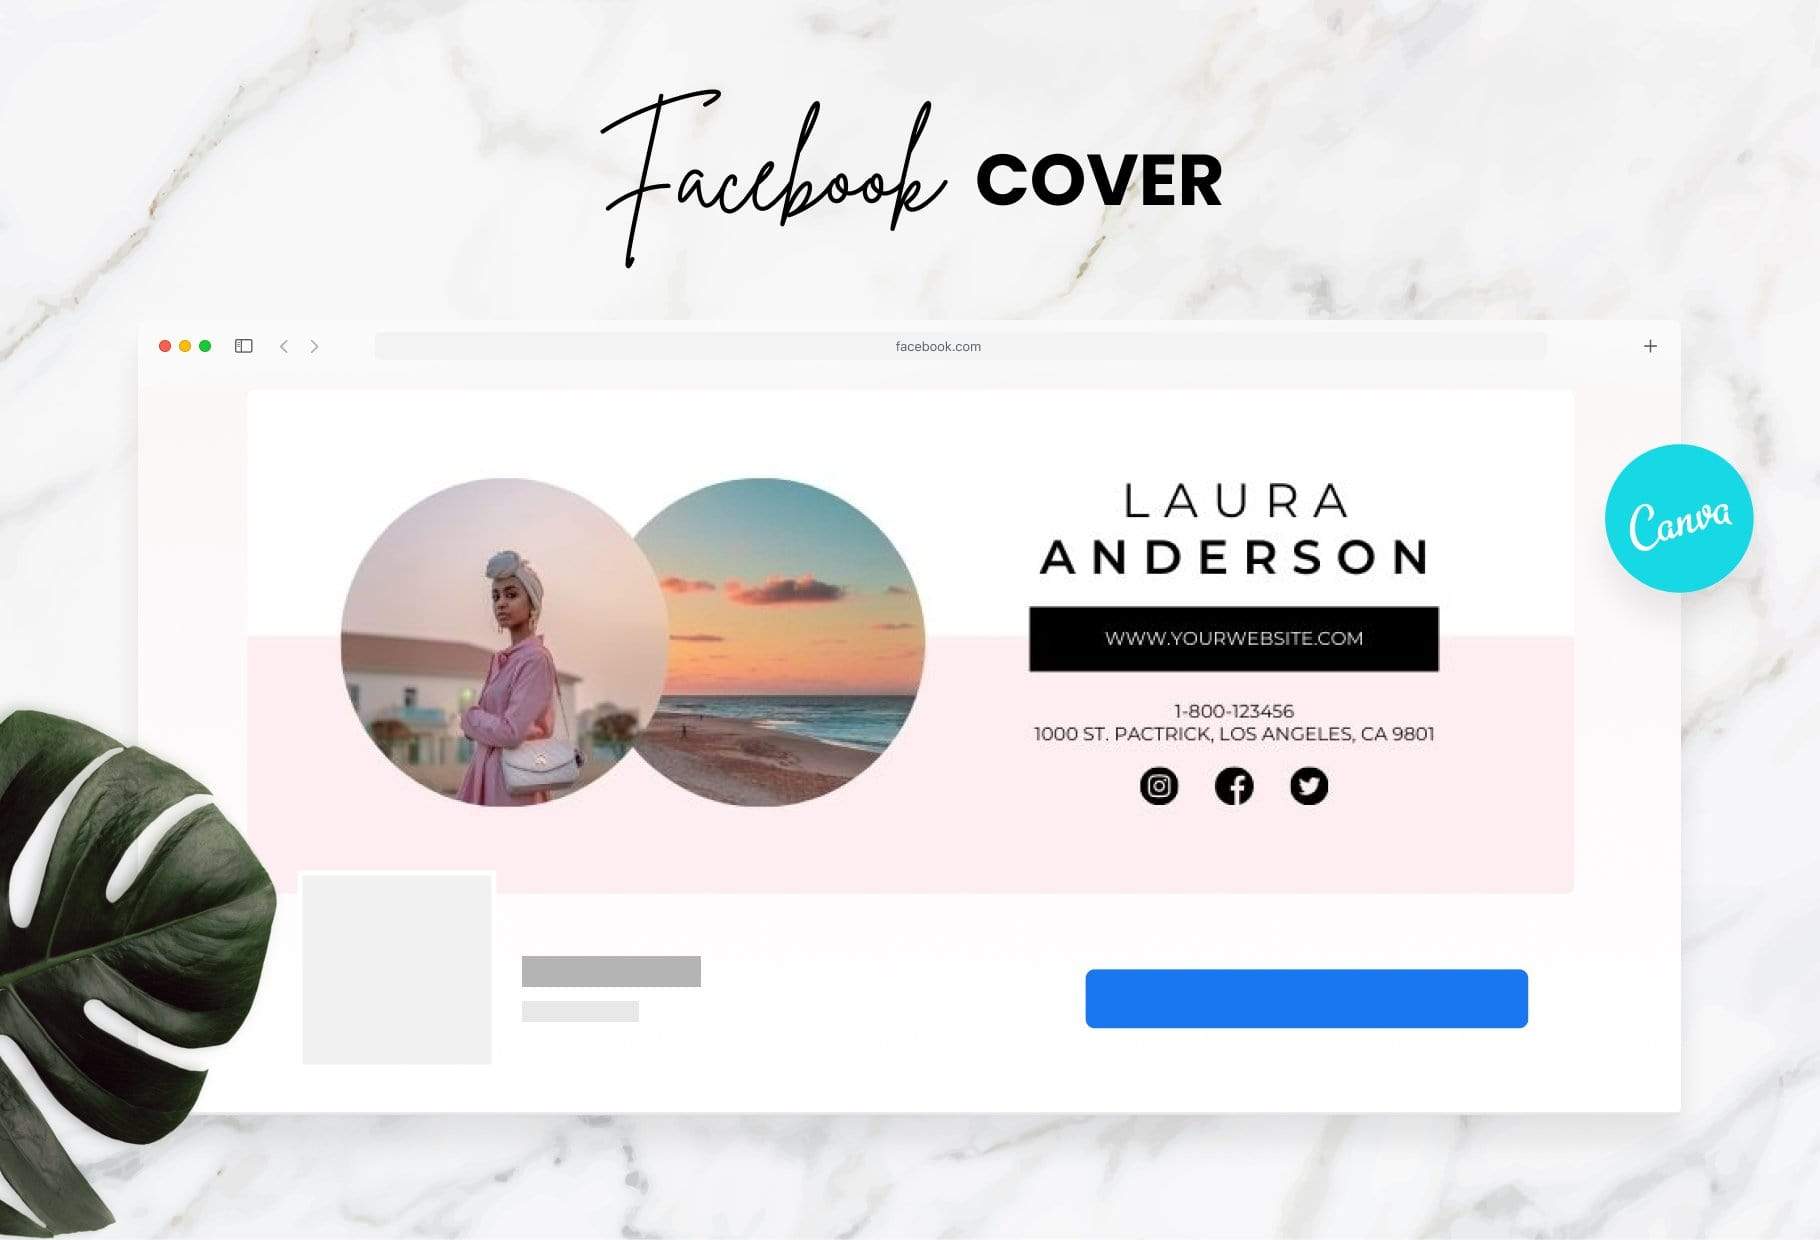 Laura Facebook Cover Canva Template – Ladystrategist Shop